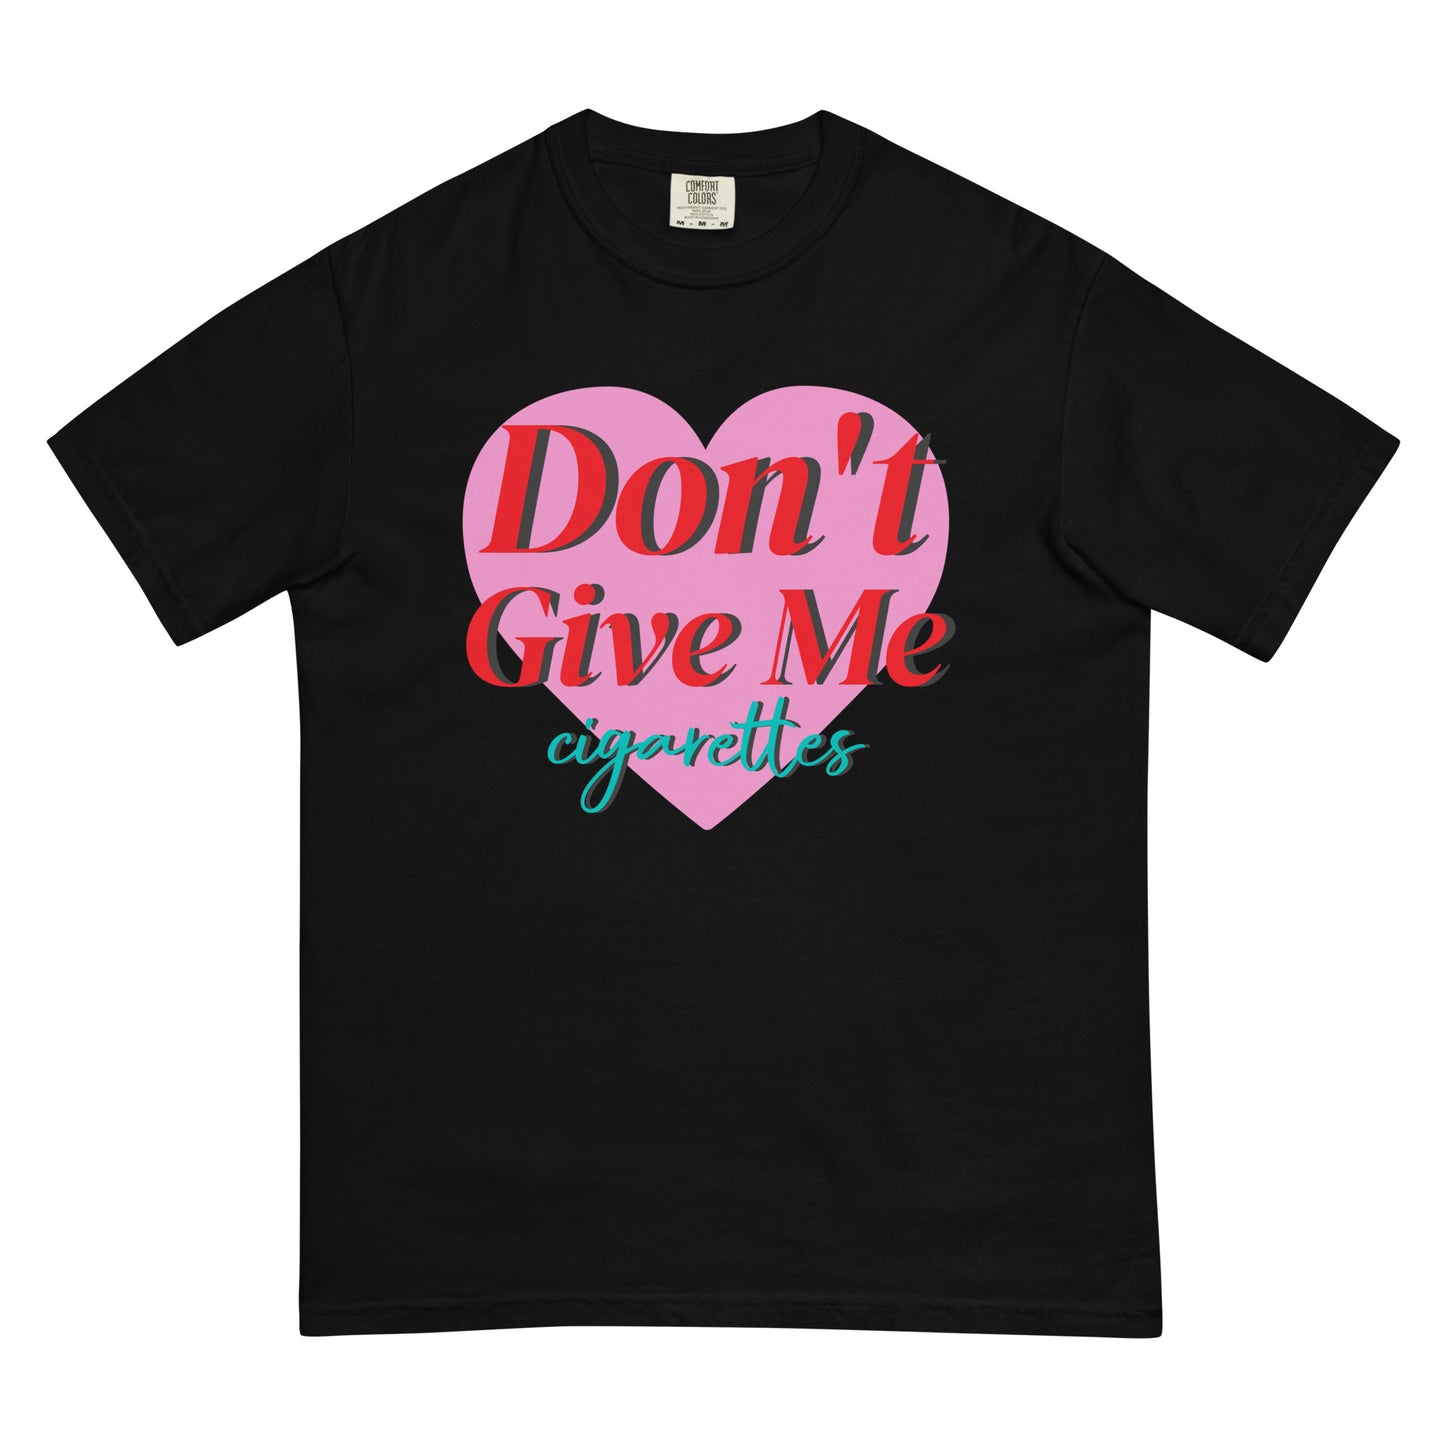 Don't Give Me Cigarettes Tee